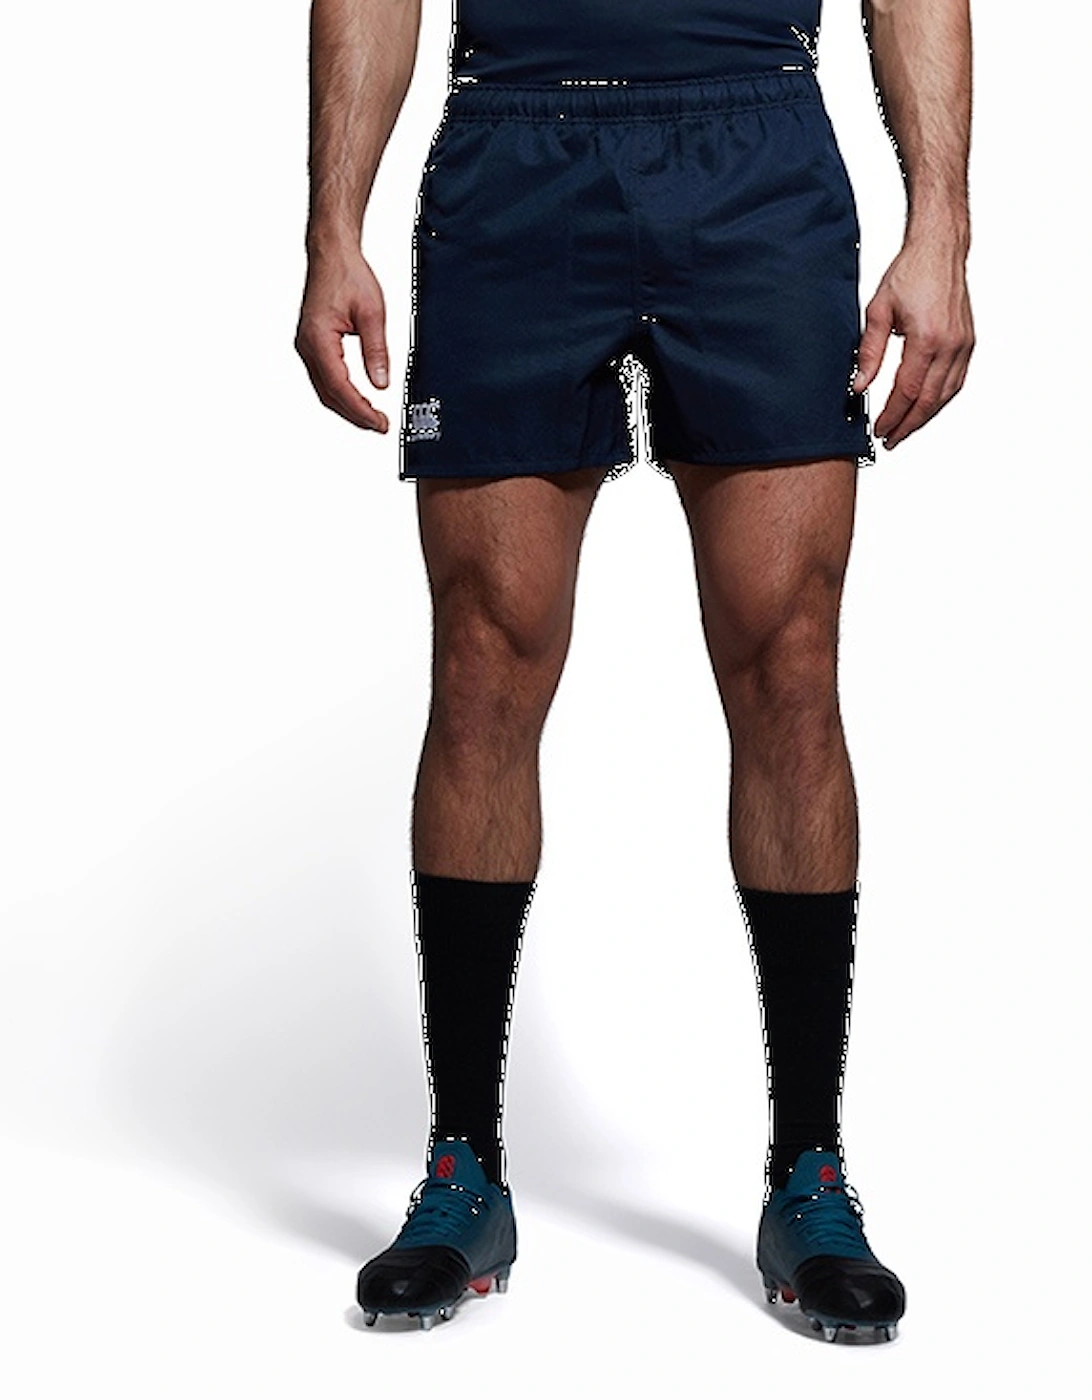 Canterbury Professional Polyester Rugby Short | Men's |  | S